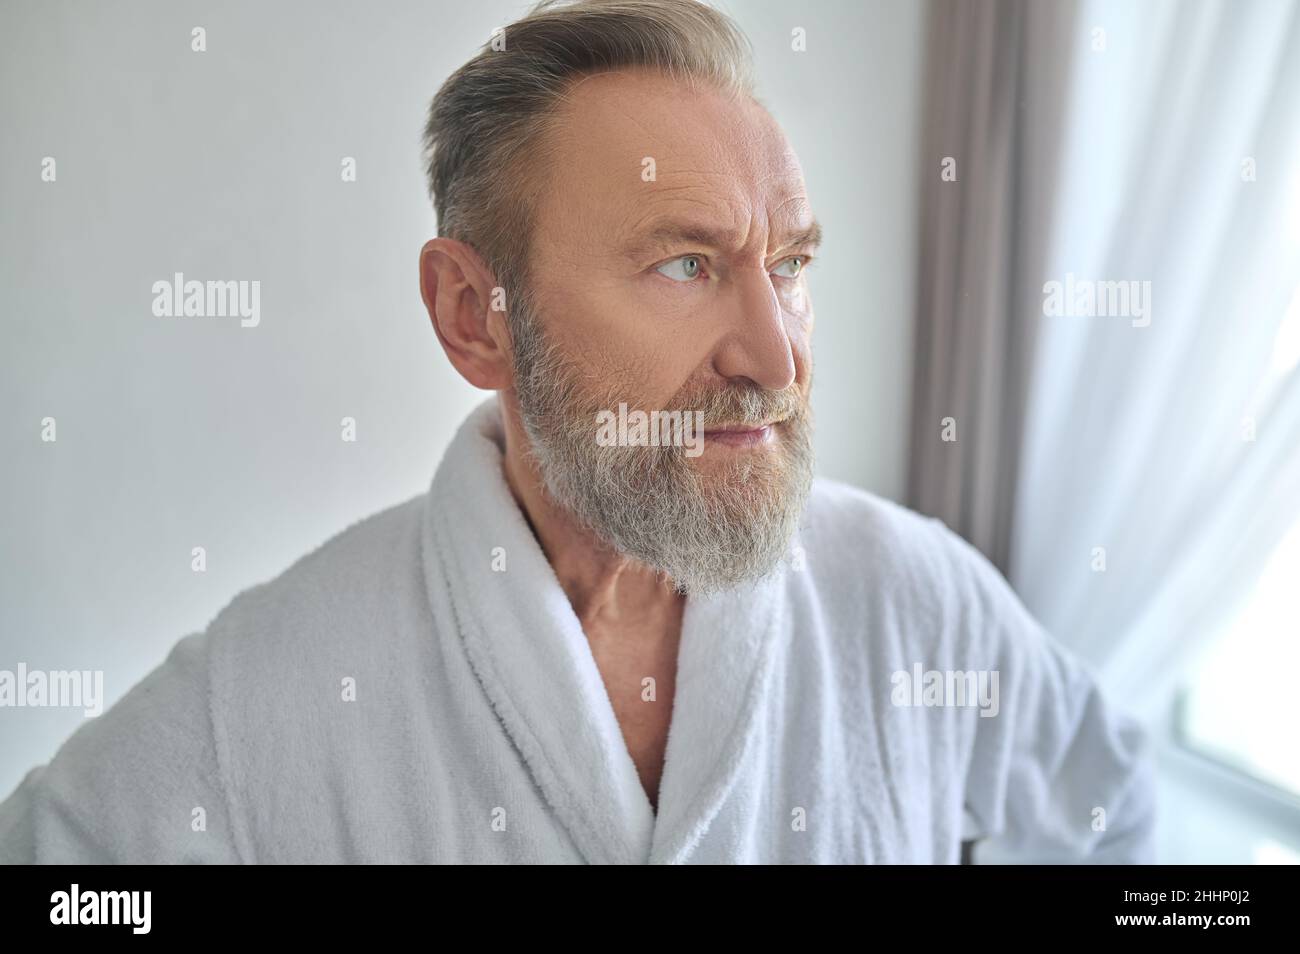 Thoughtful man in the towelling robe looking away Stock Photo